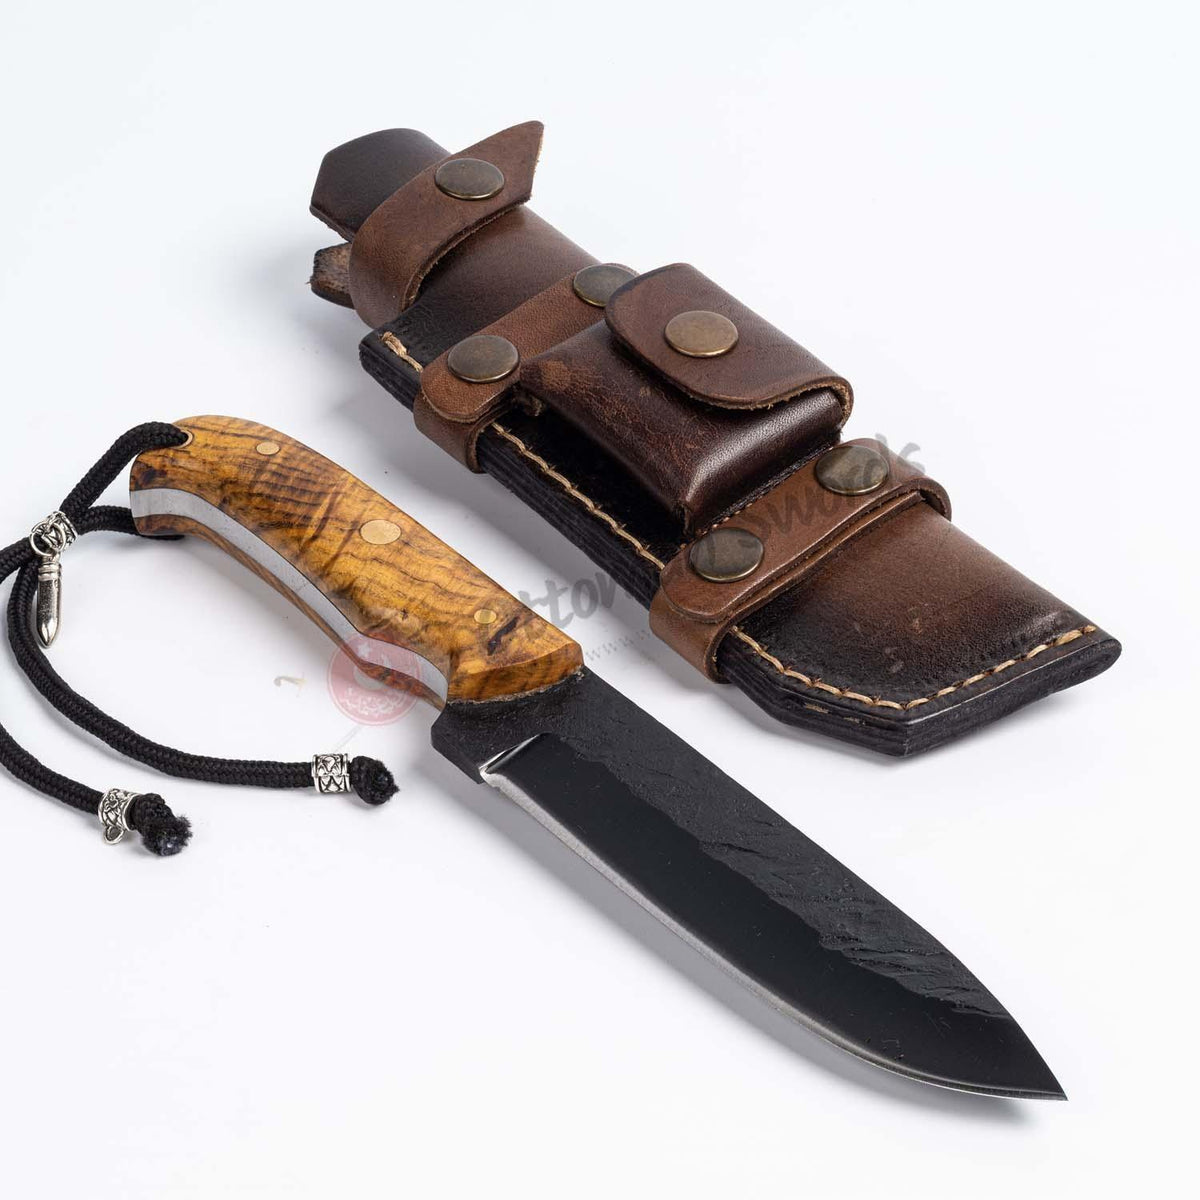 Hand Forged Black Blade Survival Knife Wooden Handle (1)